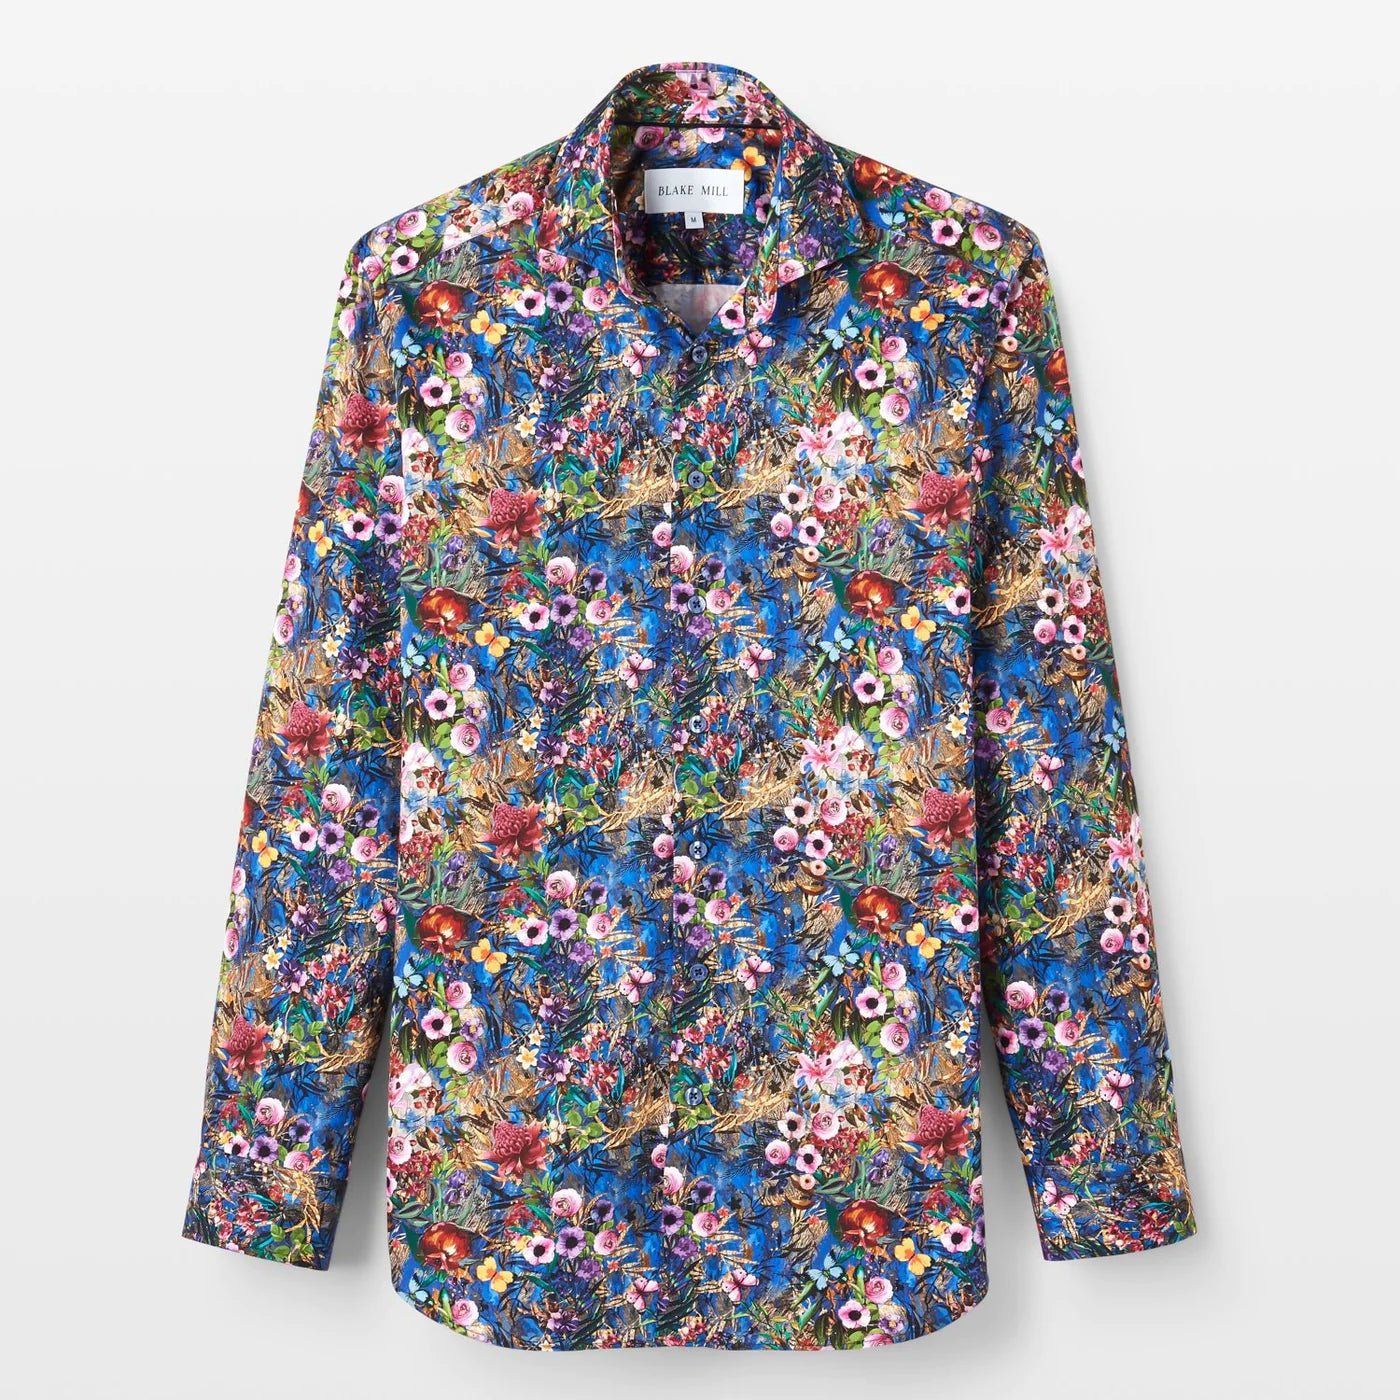 Men's Shirts: From Floral to Geometric Prints - Blake Mill